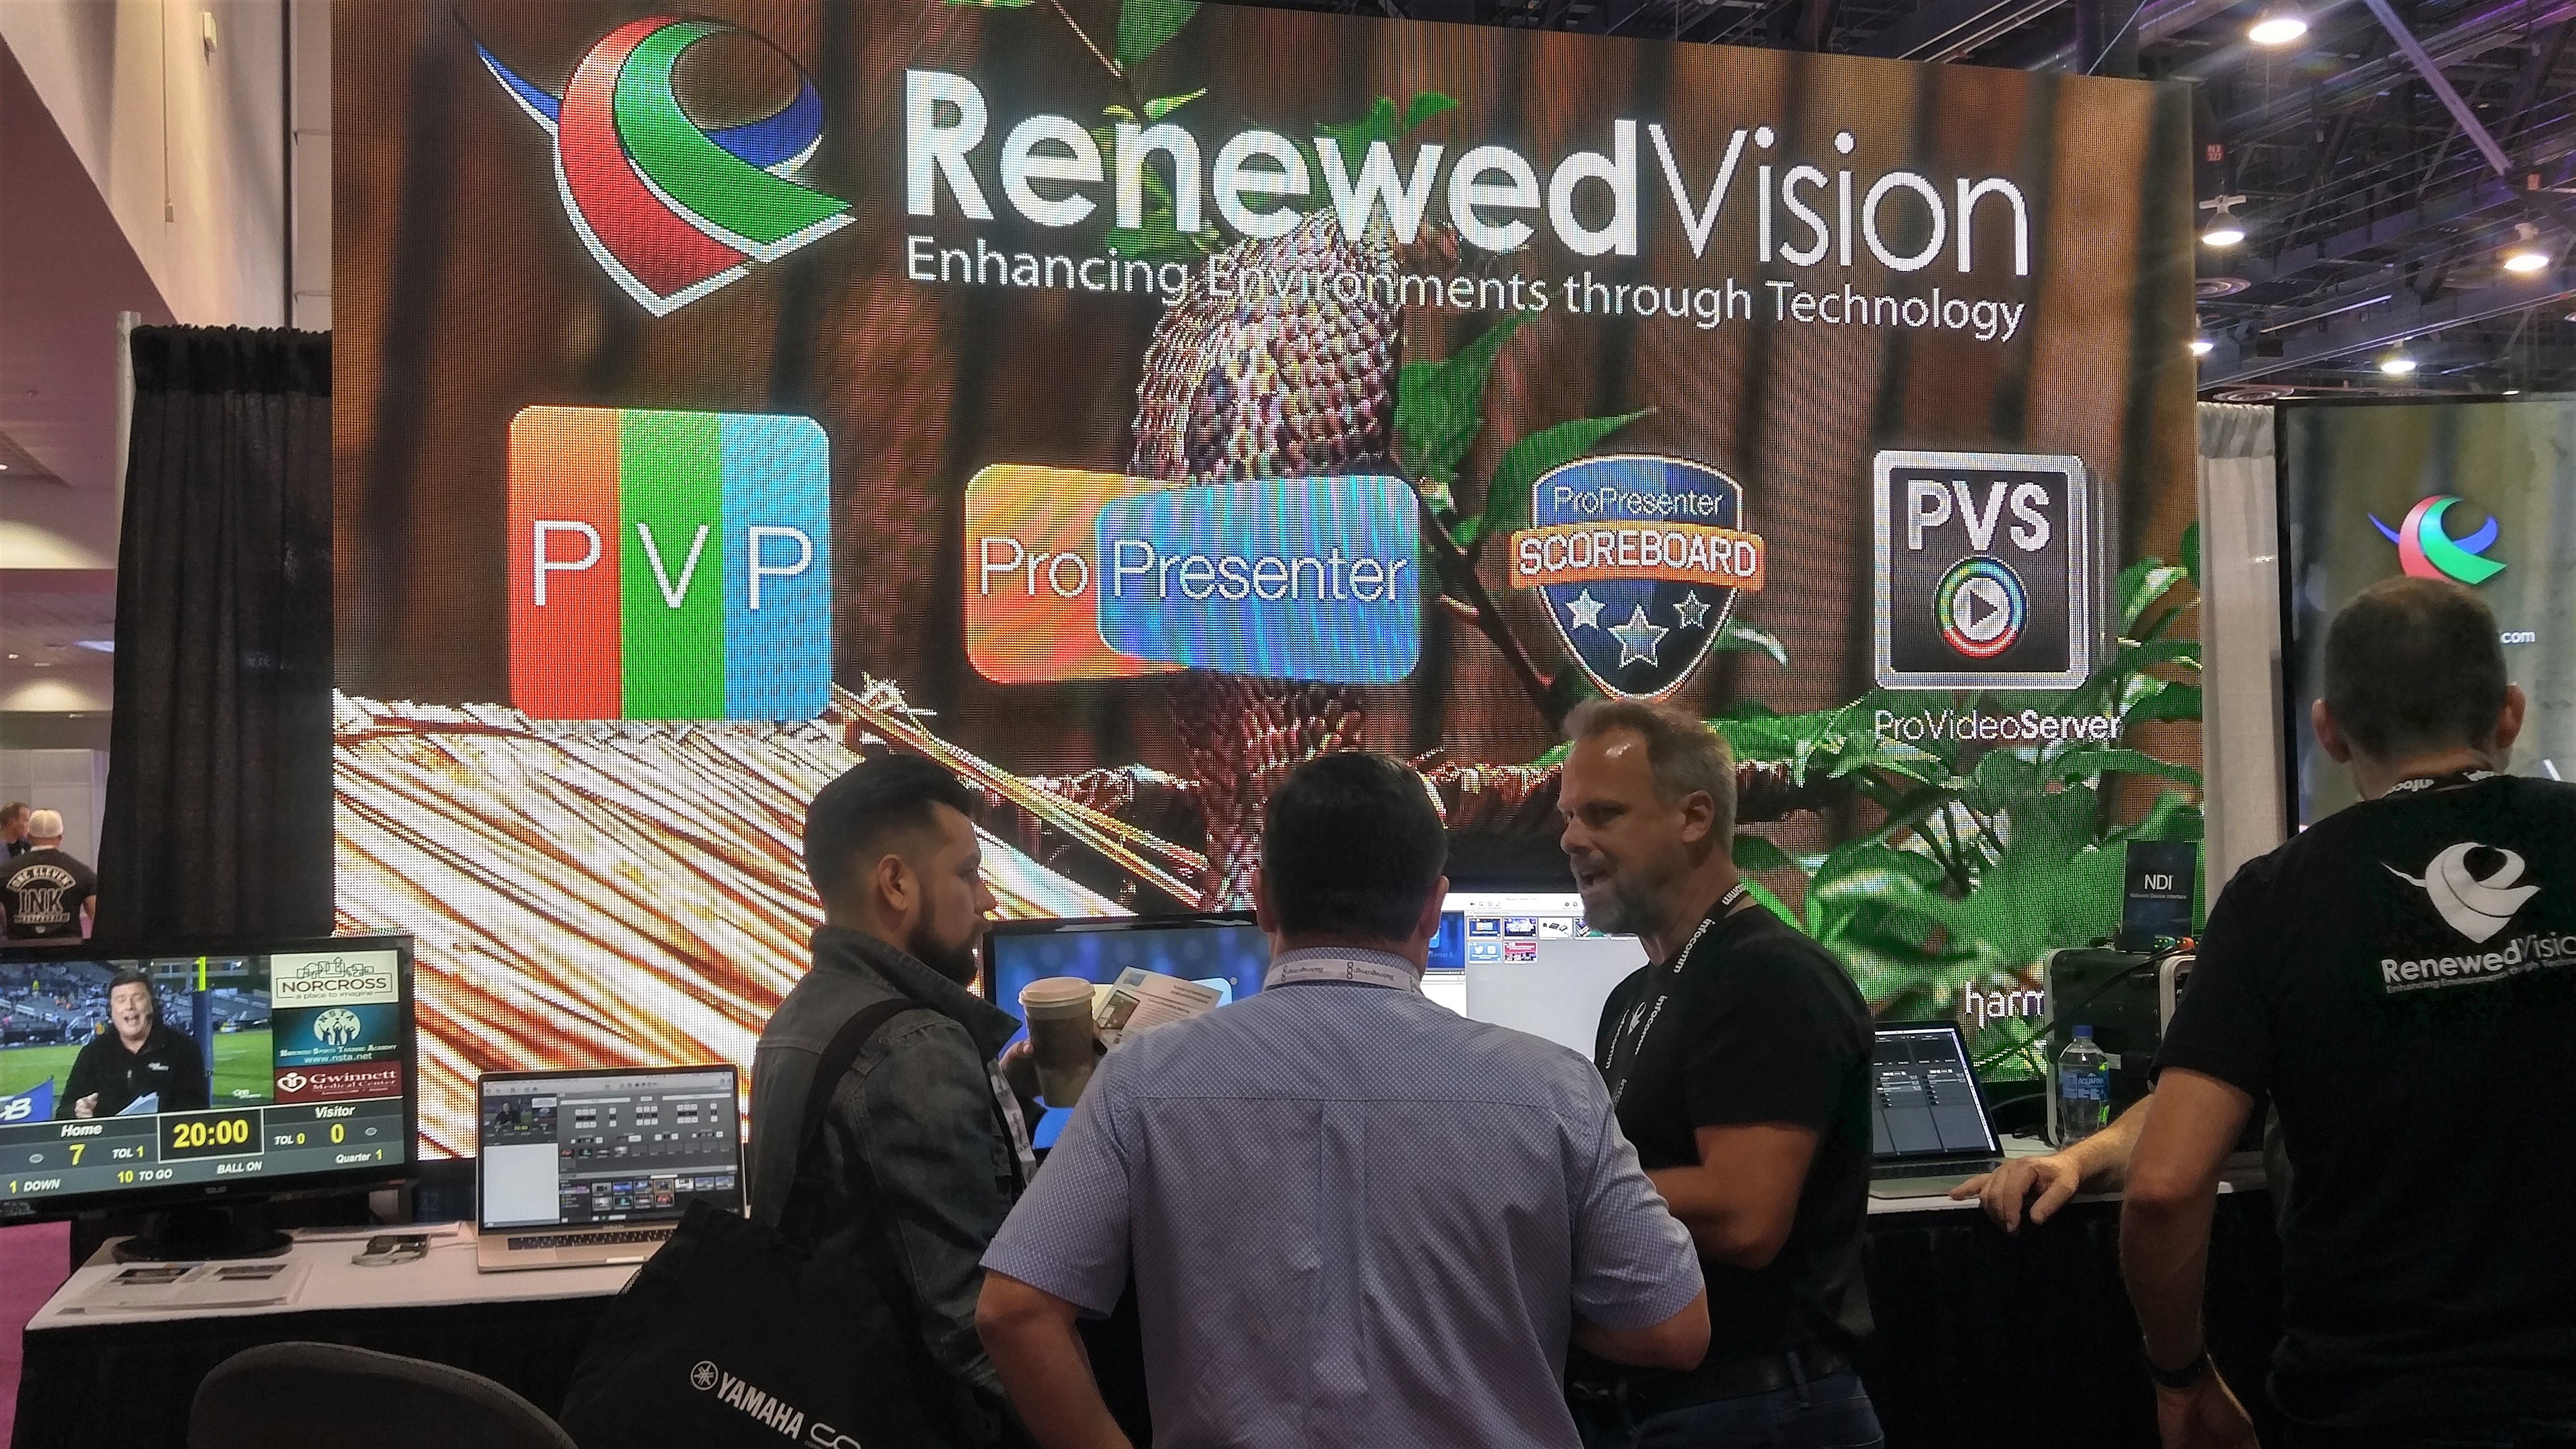 Renewed Vision's booth at InfoComm 2018